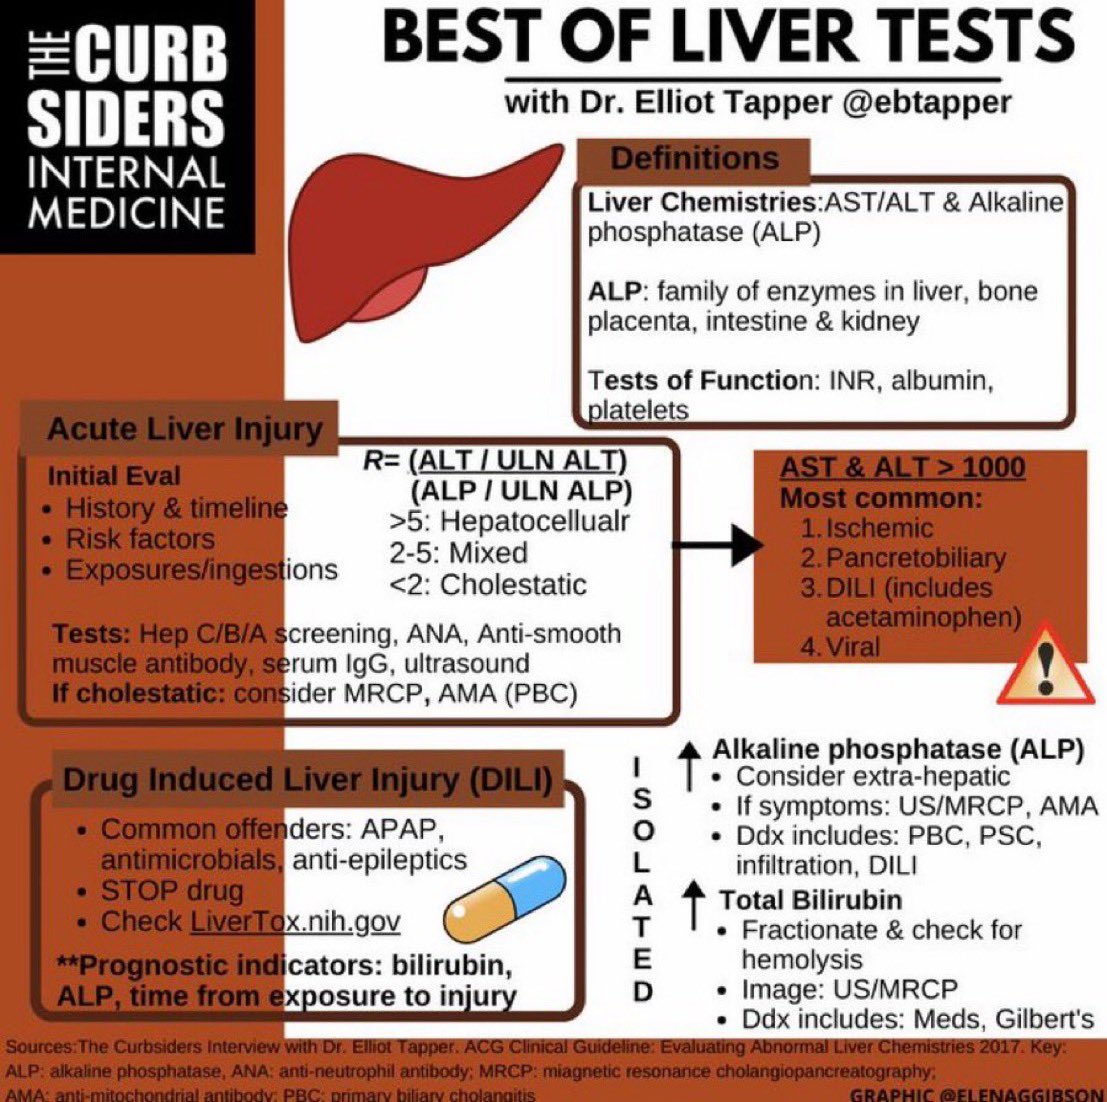 Best of liver tests @thecurbsiders #Medtwitter